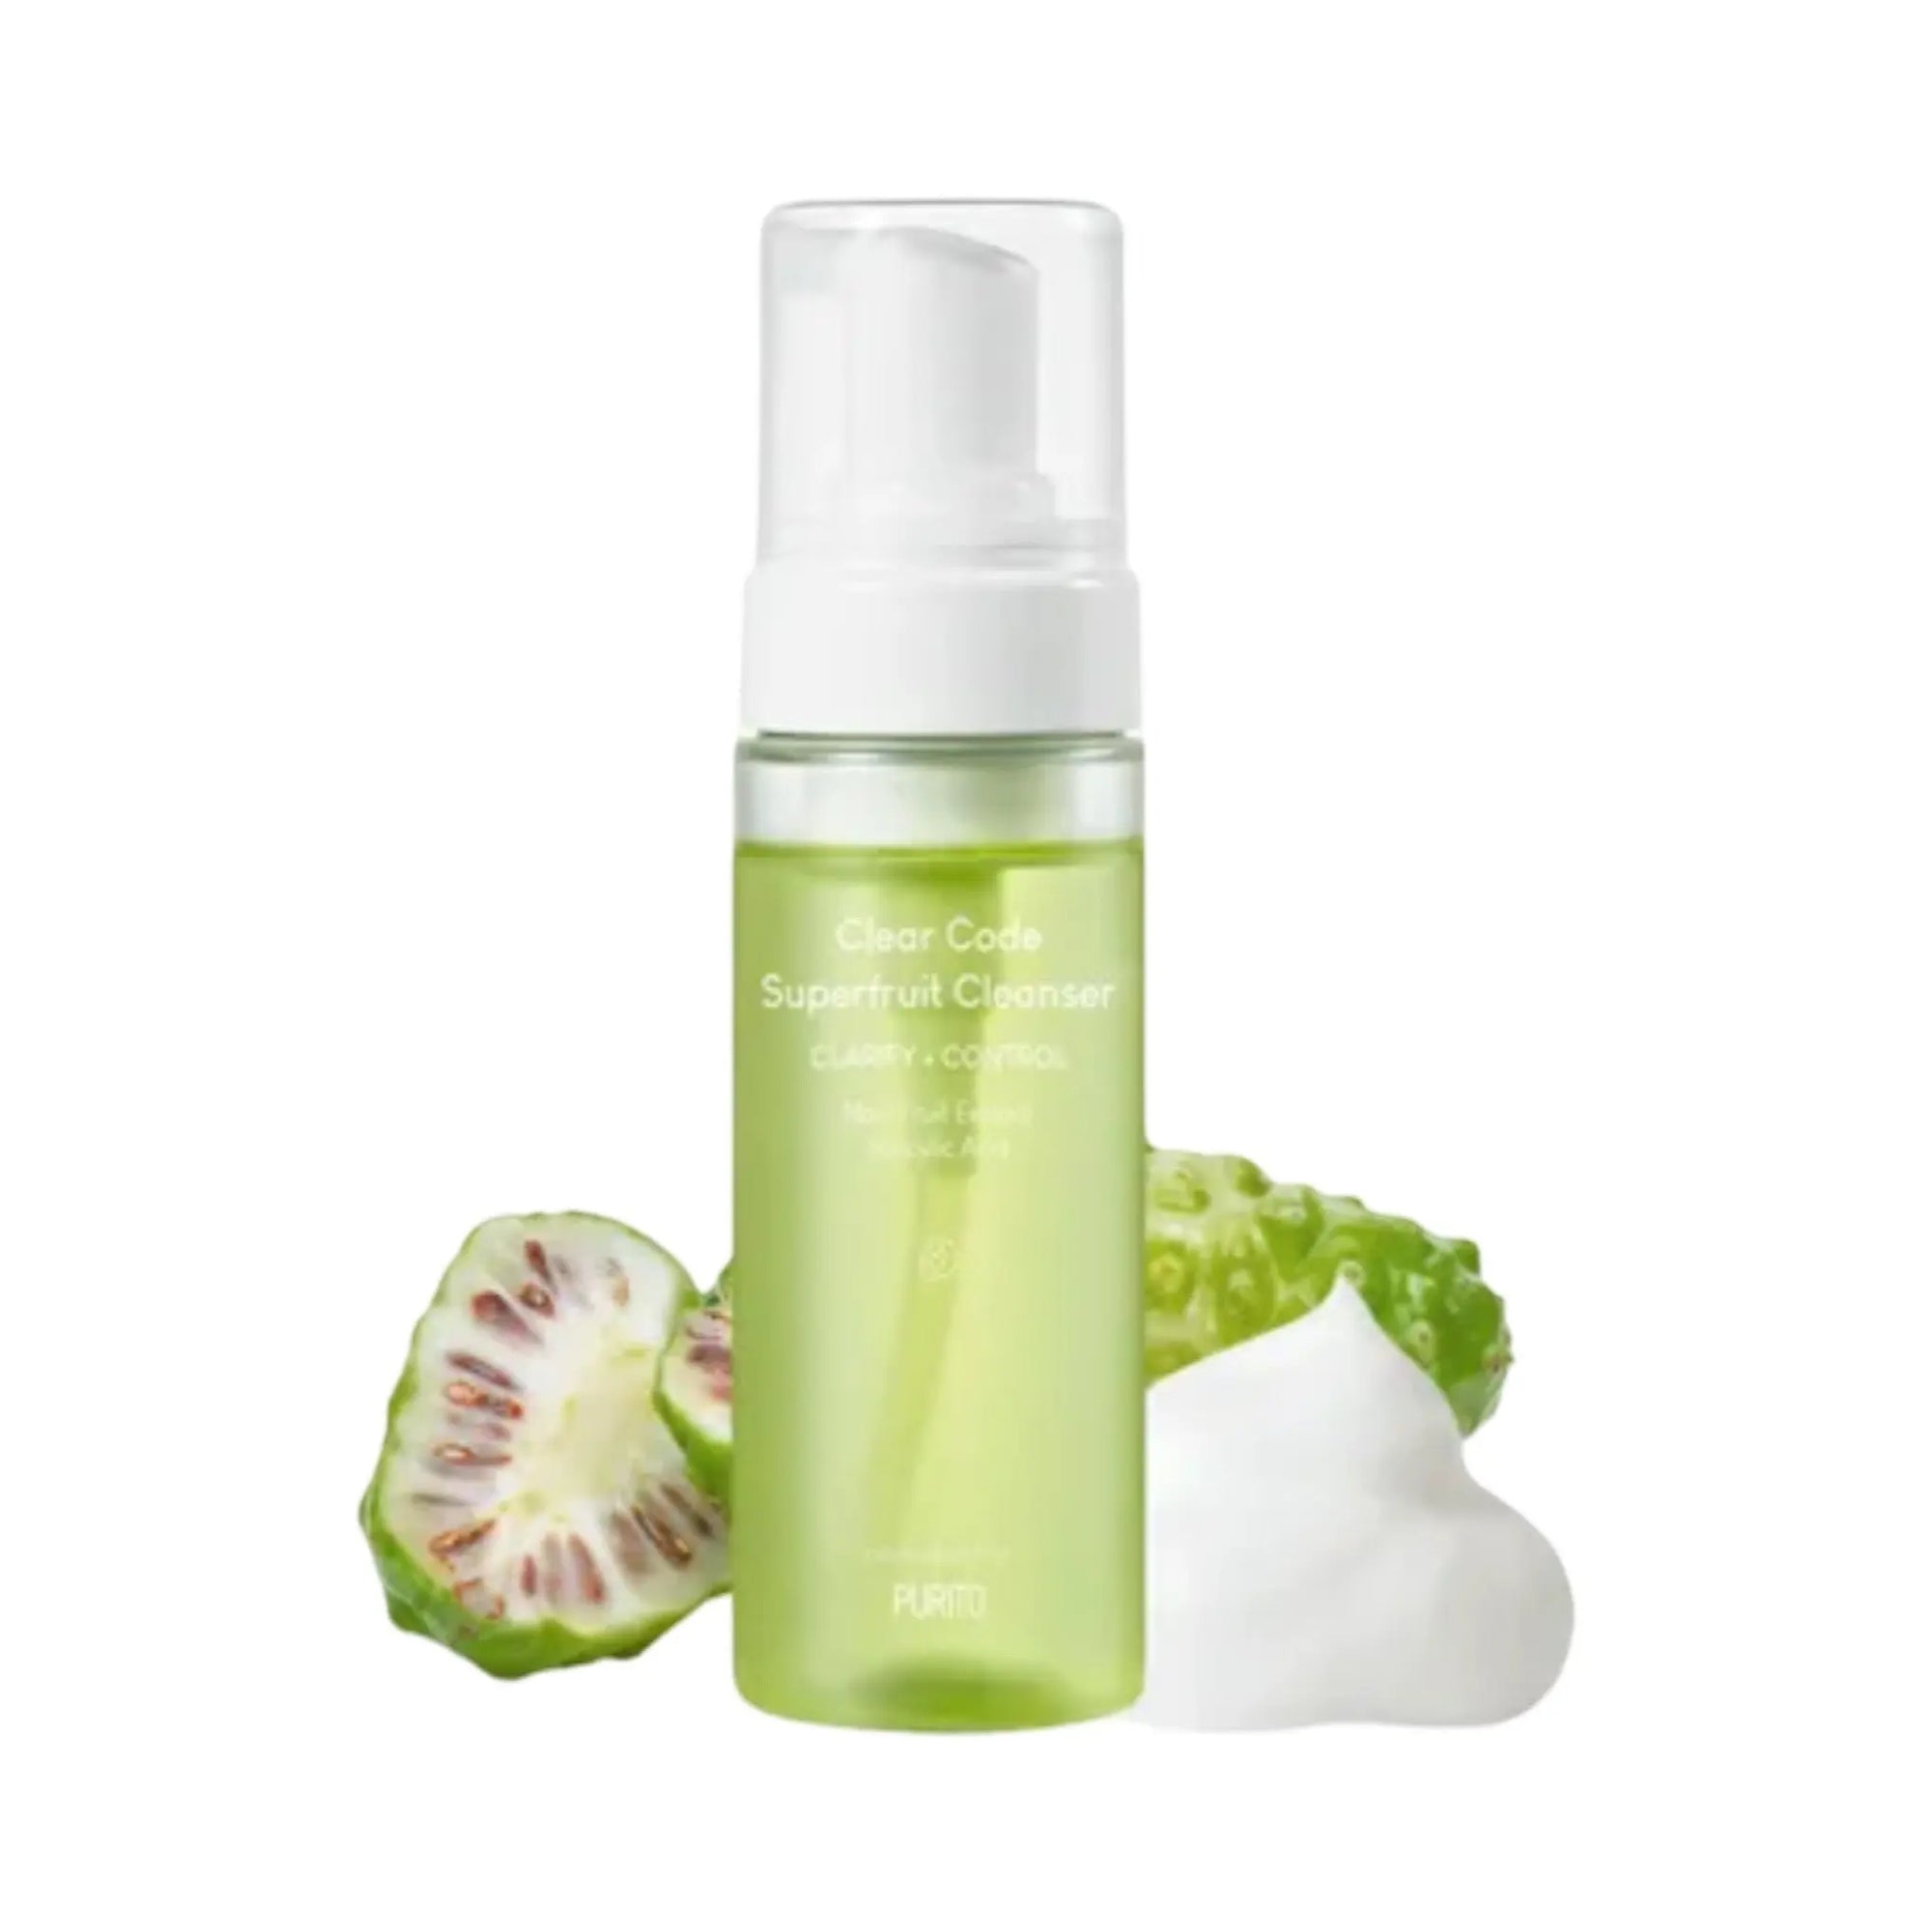 Purito - Clear Code Superfruit Cleanser 150mL Purito